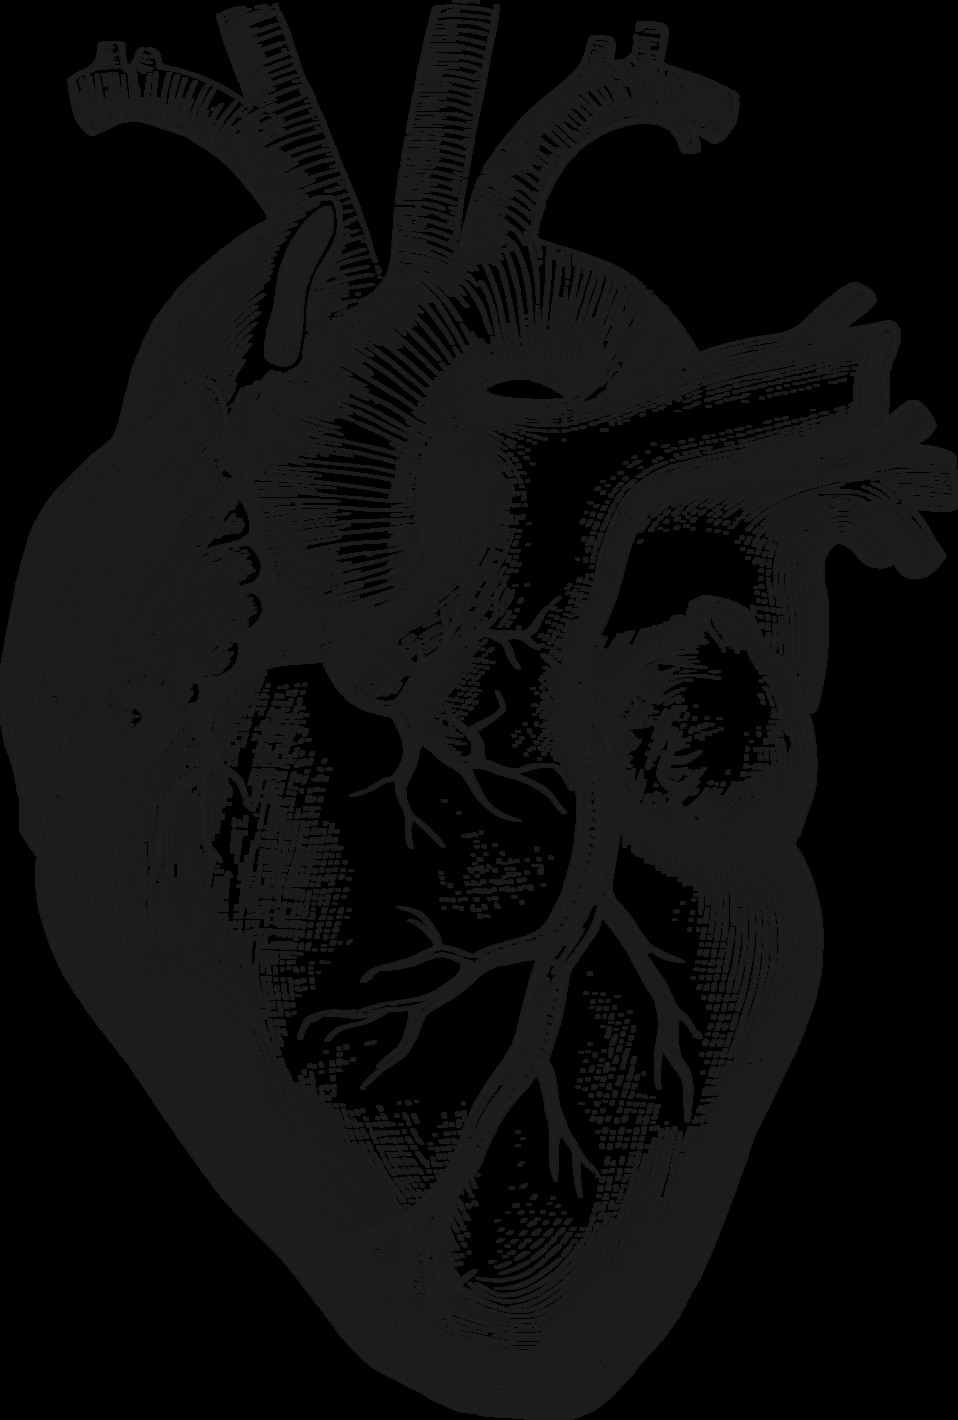 Drawing Of A Heart with Parts Anatomical Heart Art Anatomical Heart Heart Anatomical Heart